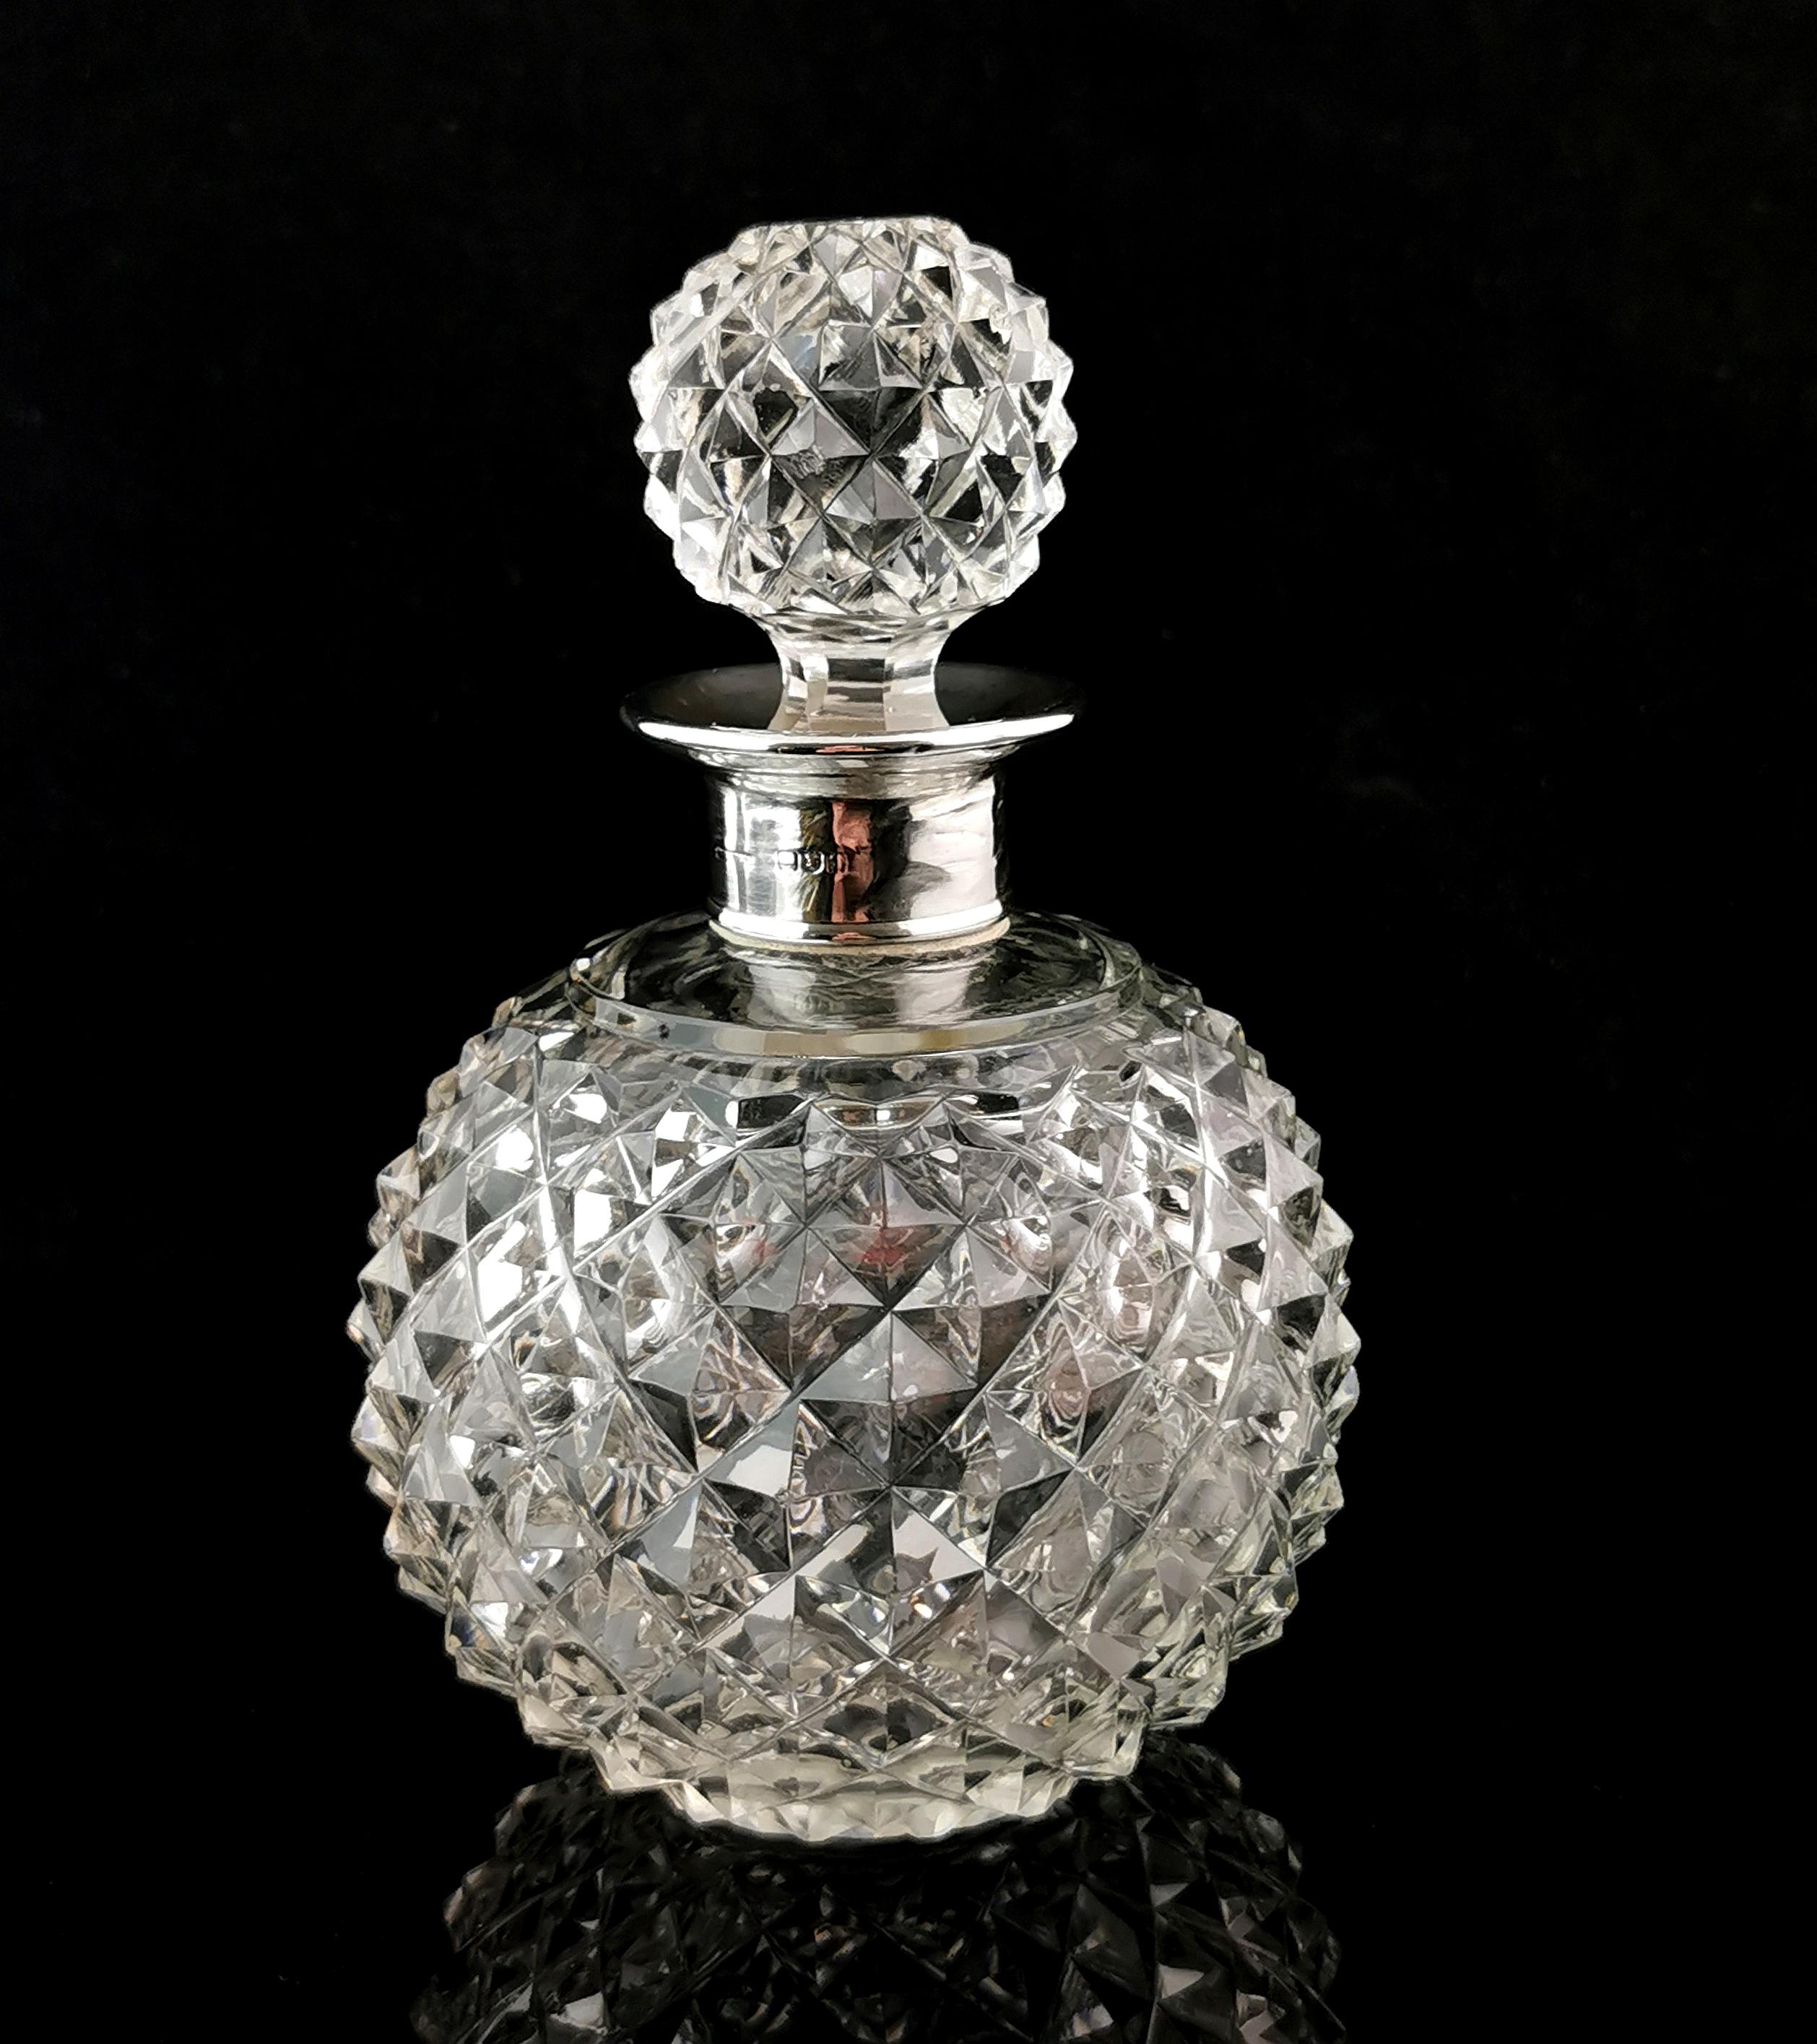 A truly stunning antique Victorian era scent bottle.

It is a large globular shaped bottle with a wonderful chunky faceted hobnail cut to the body and the matching stopper, this type of cut reflects the light beautifully and makes for a heavy and